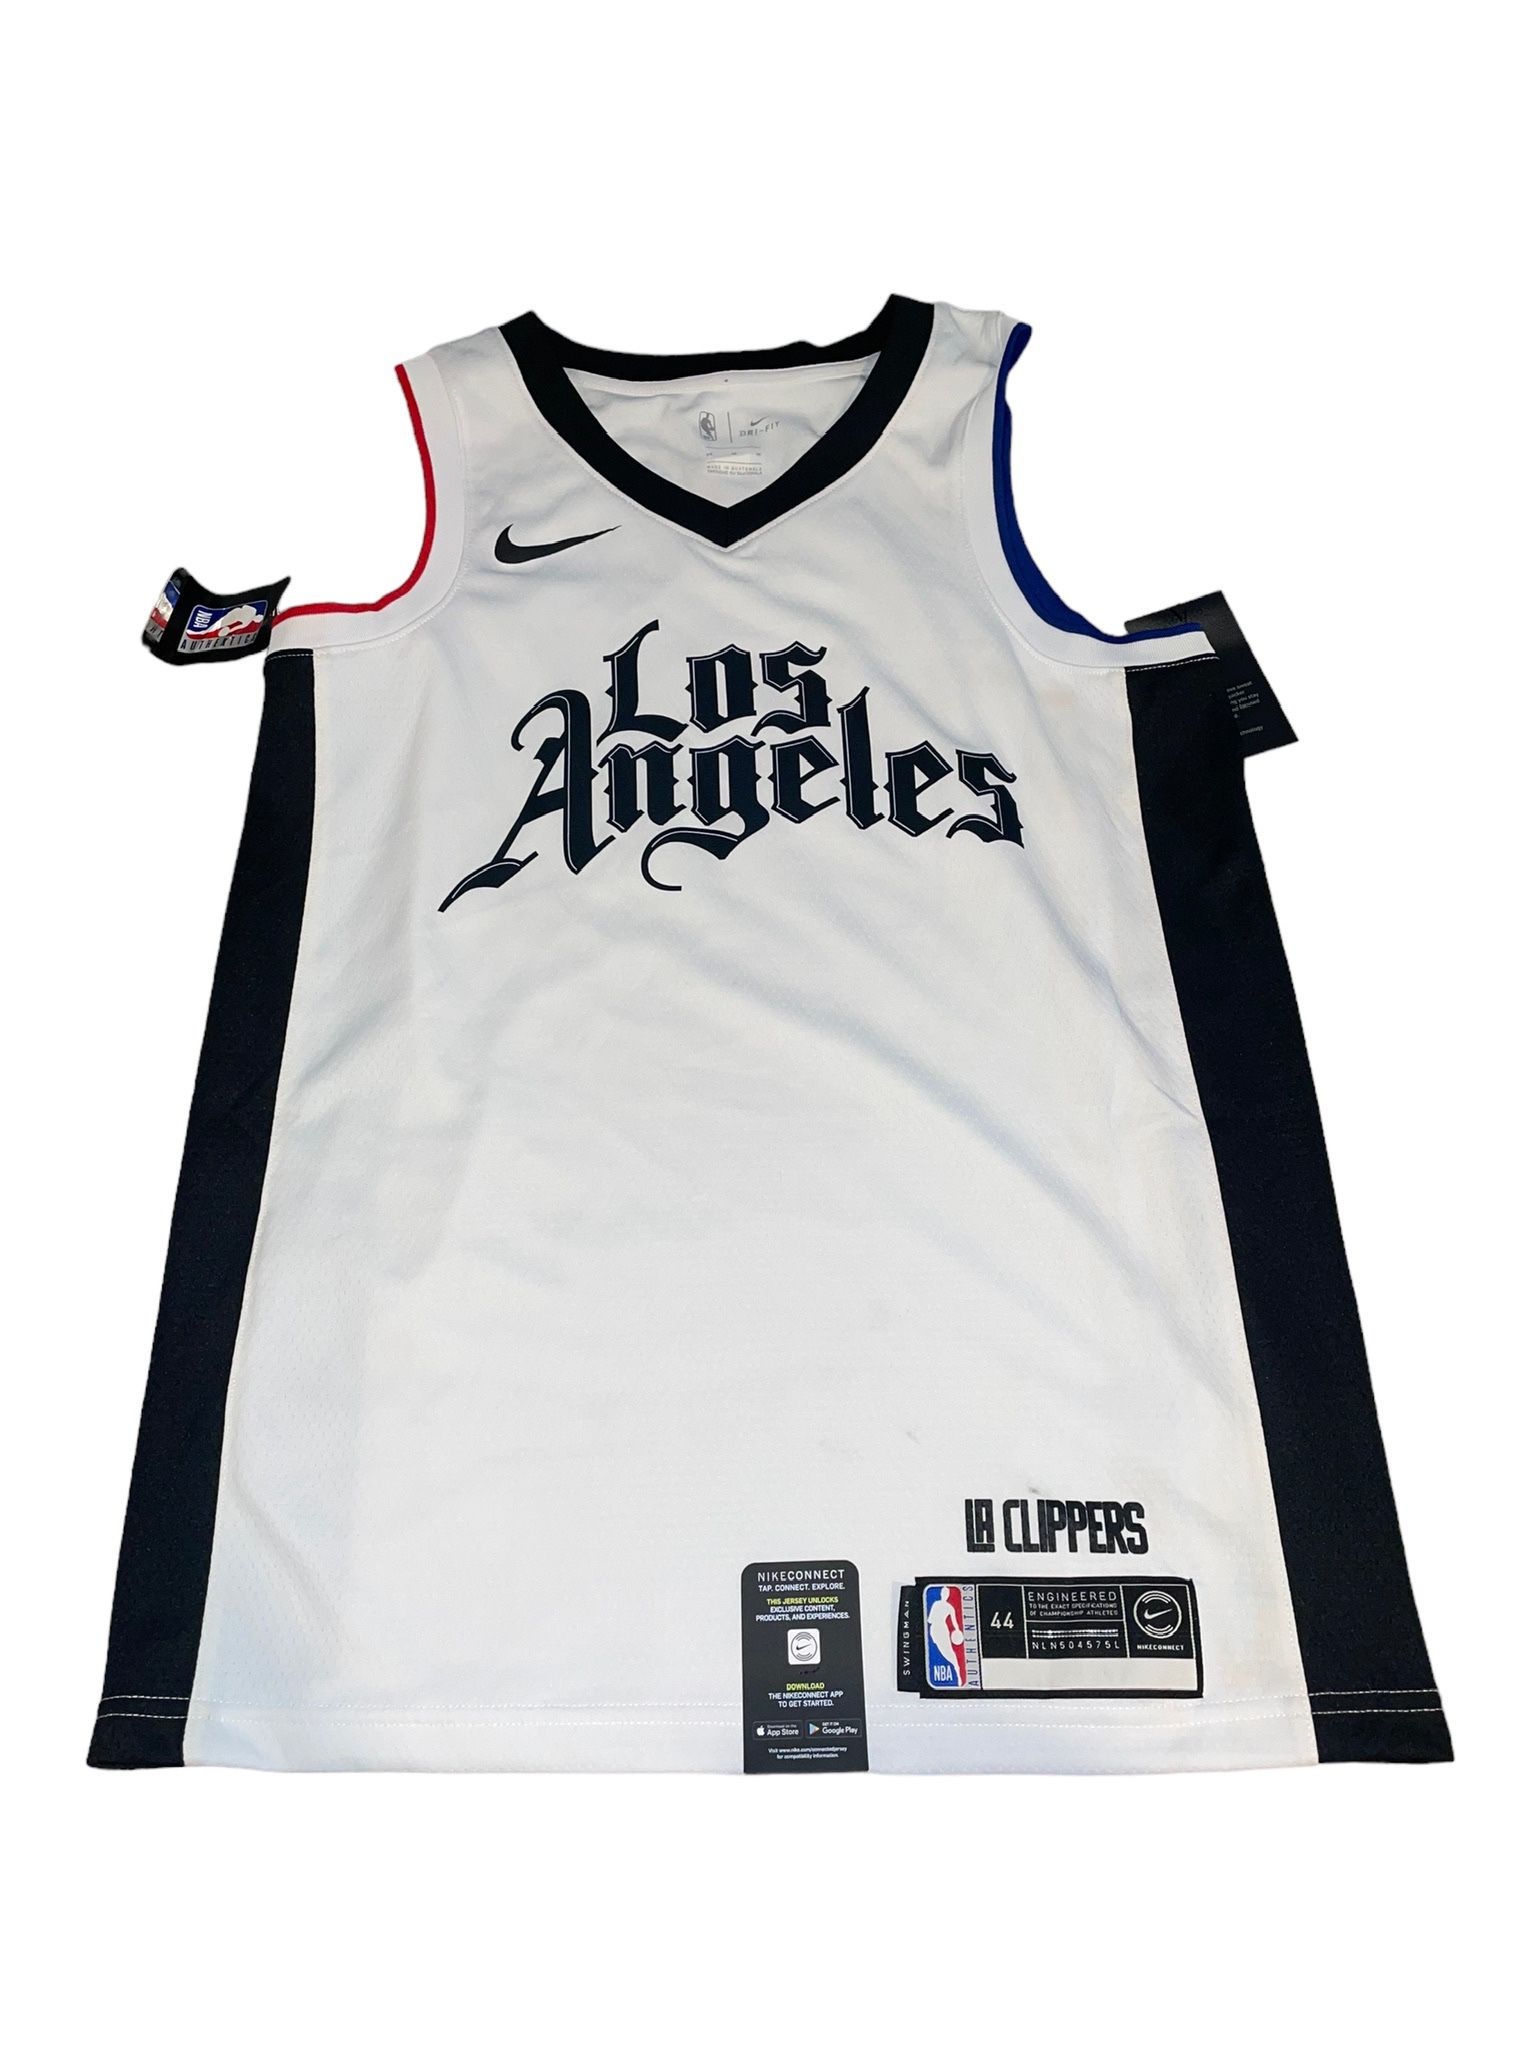 Los Angeles Clippers Nike Mens M Jersey NWT for Sale in Portland